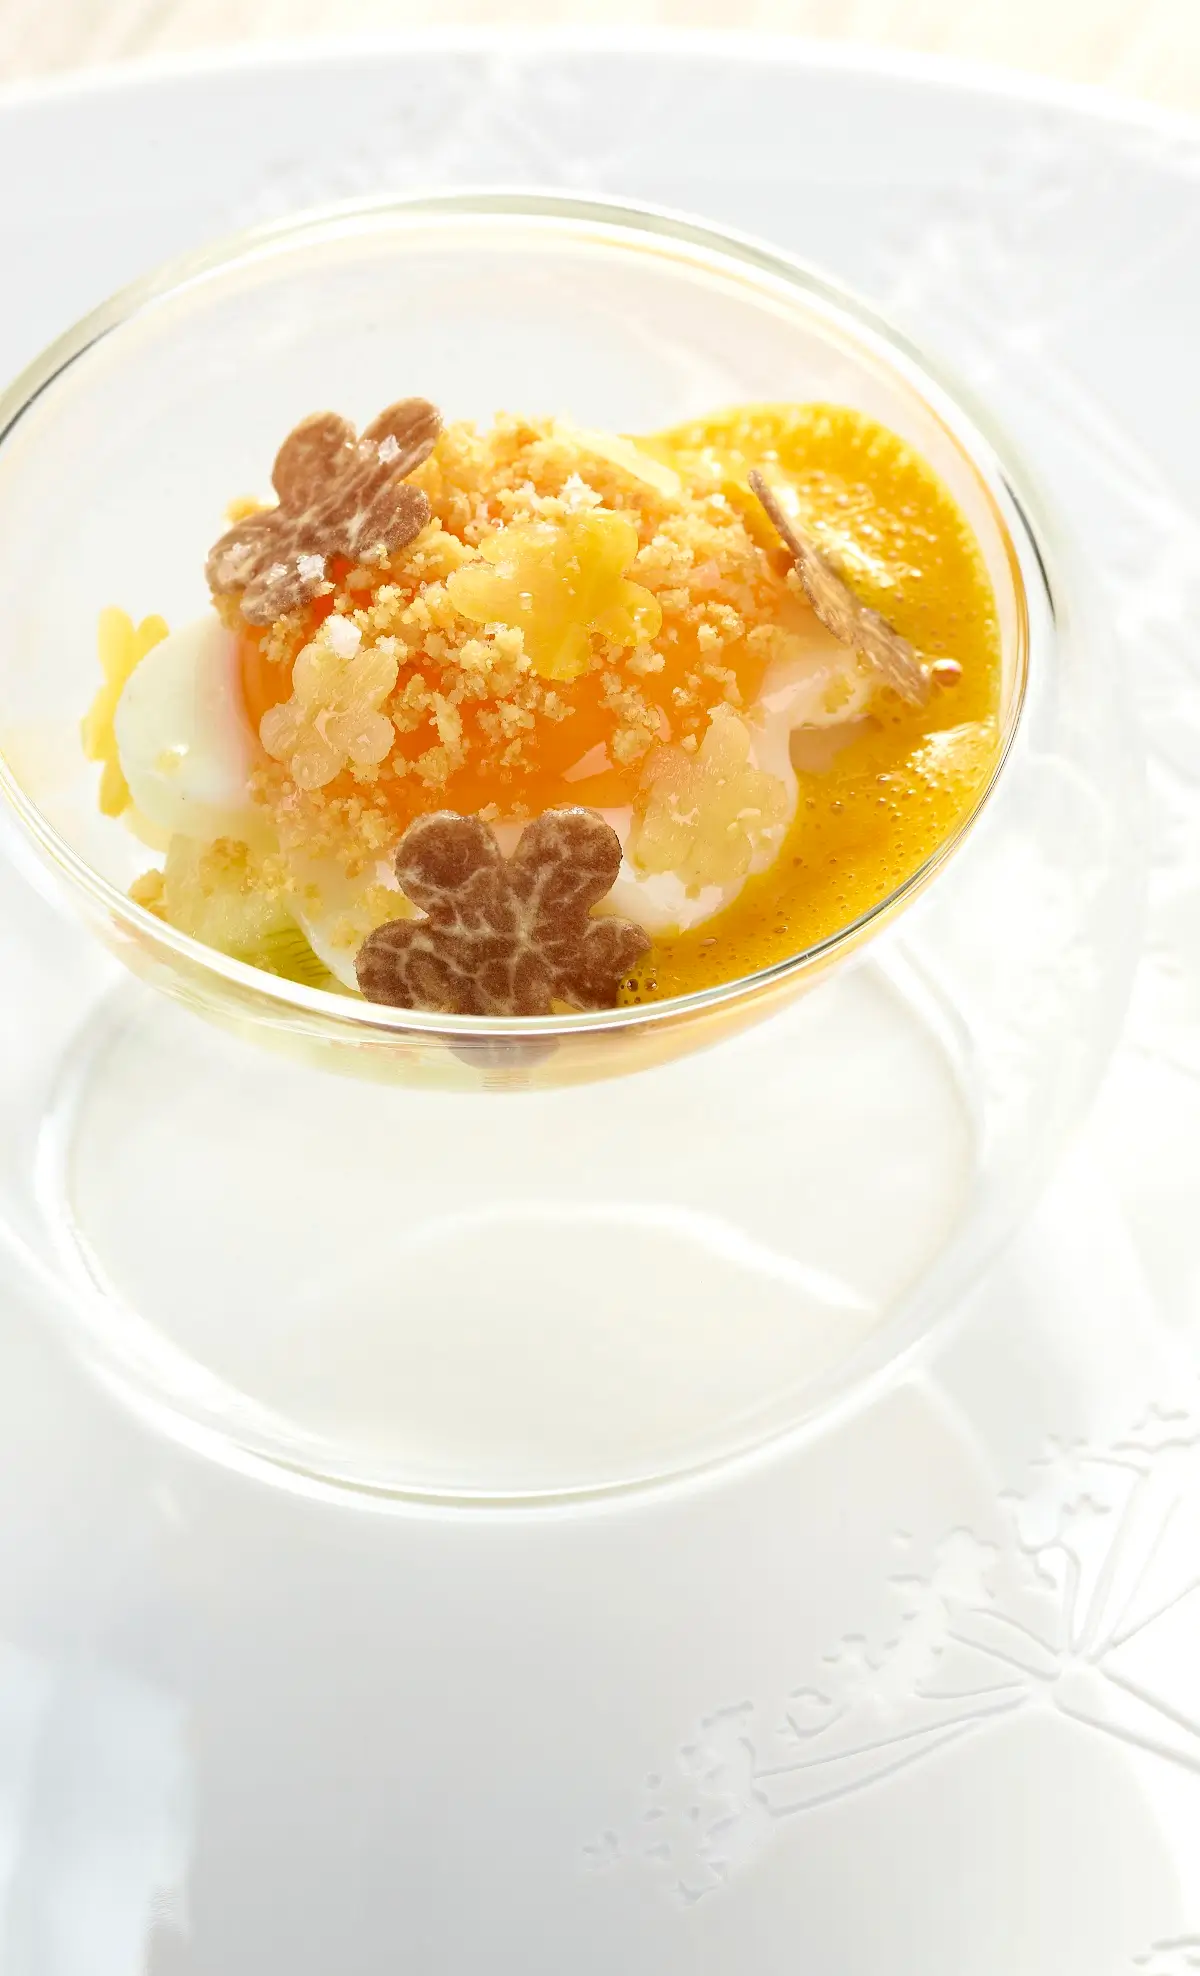 Elegant dessert with crumbles and fruit at Auguste, a Michelin Star restaurant in Paris.